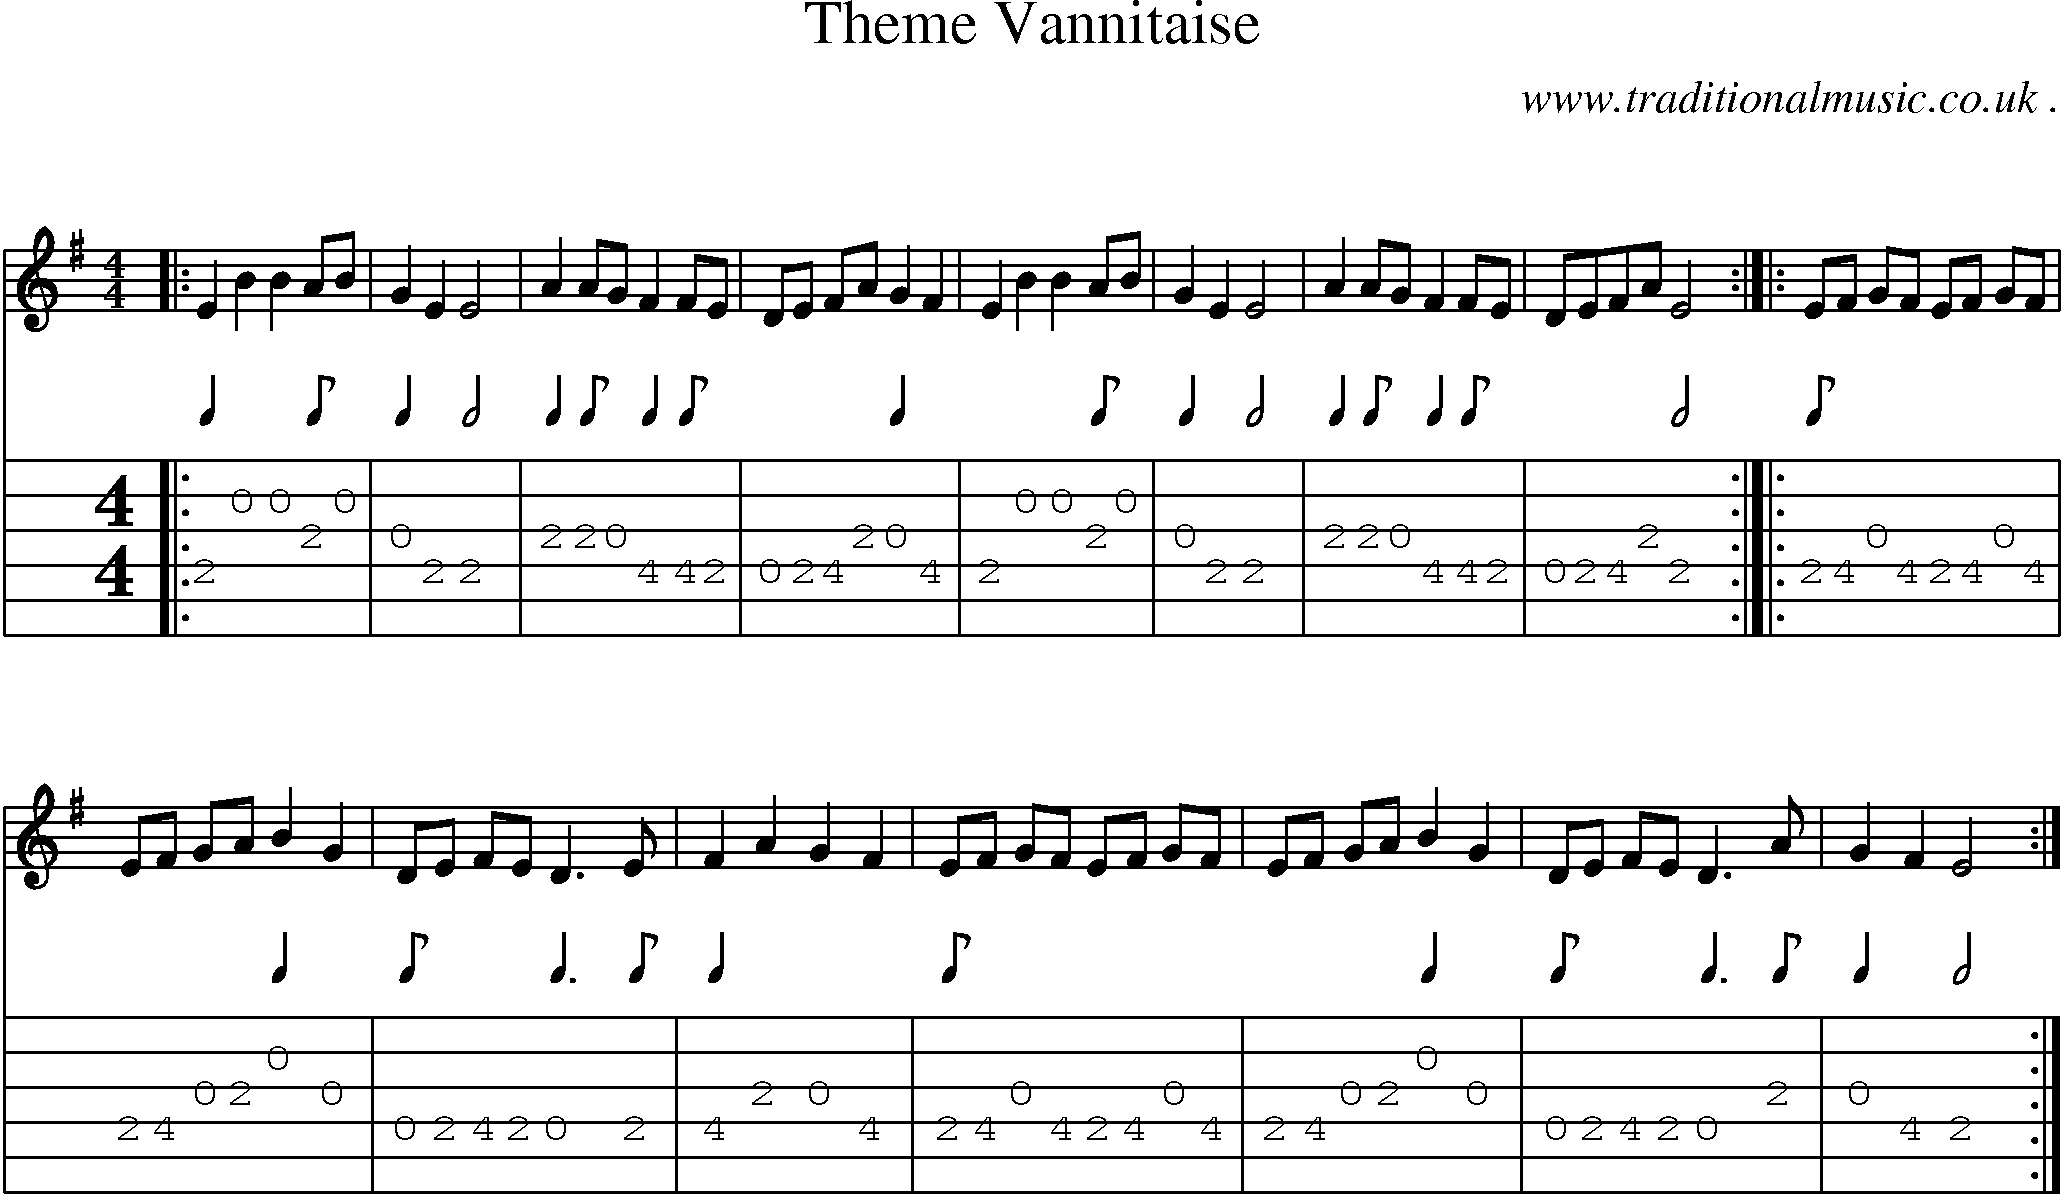 Sheet-Music and Guitar Tabs for Theme Vannitaise